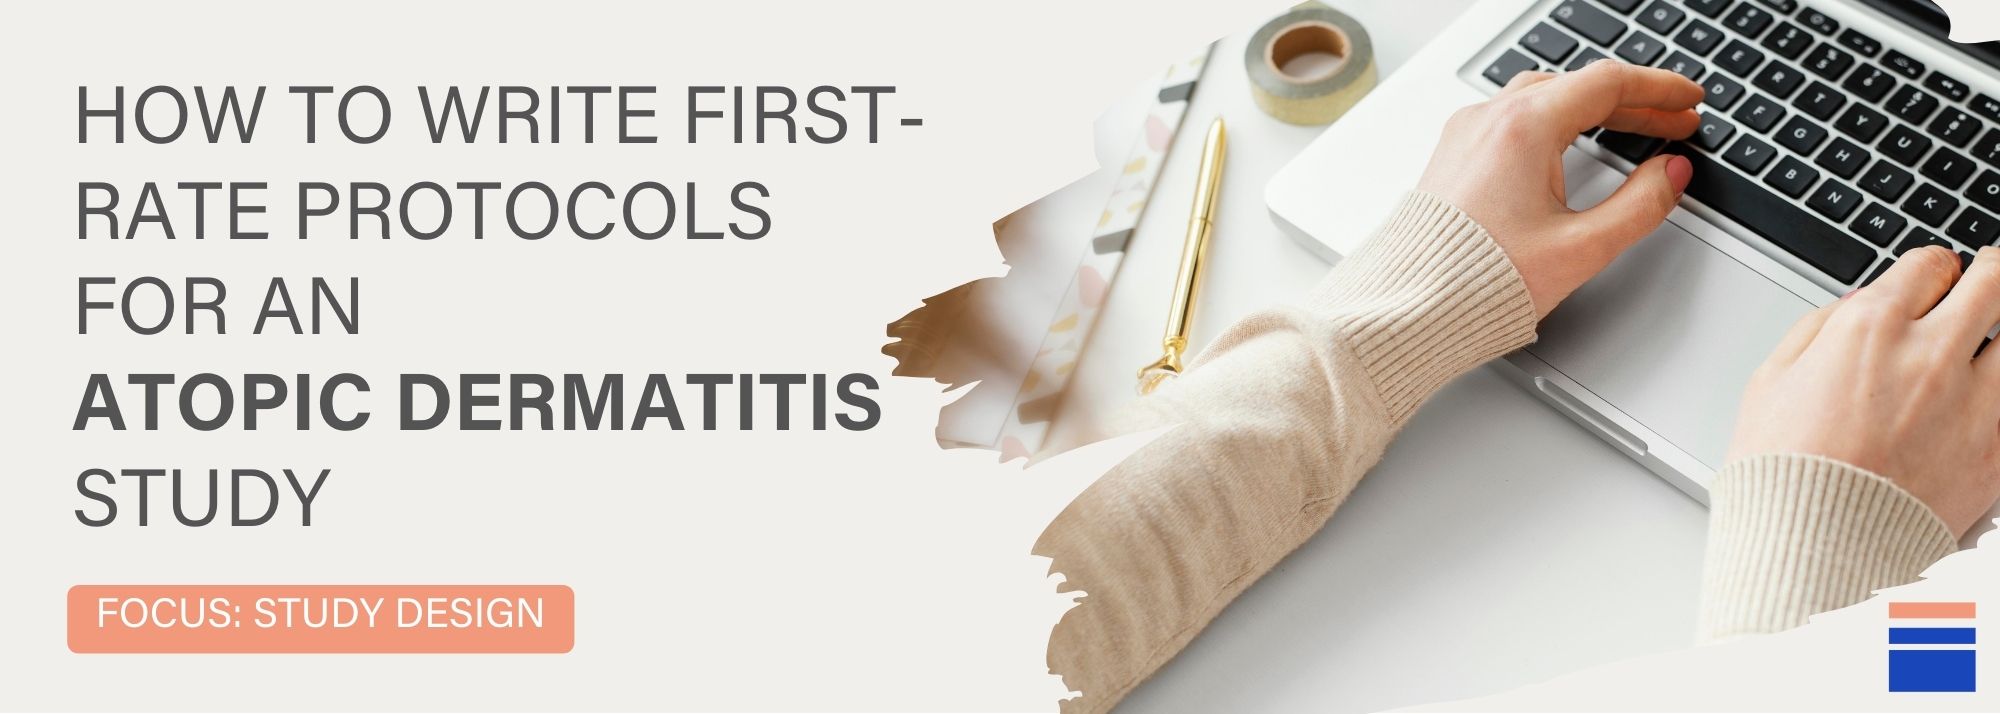 How to Write First-Rate Protocols for an Atopic Dermatitis Study